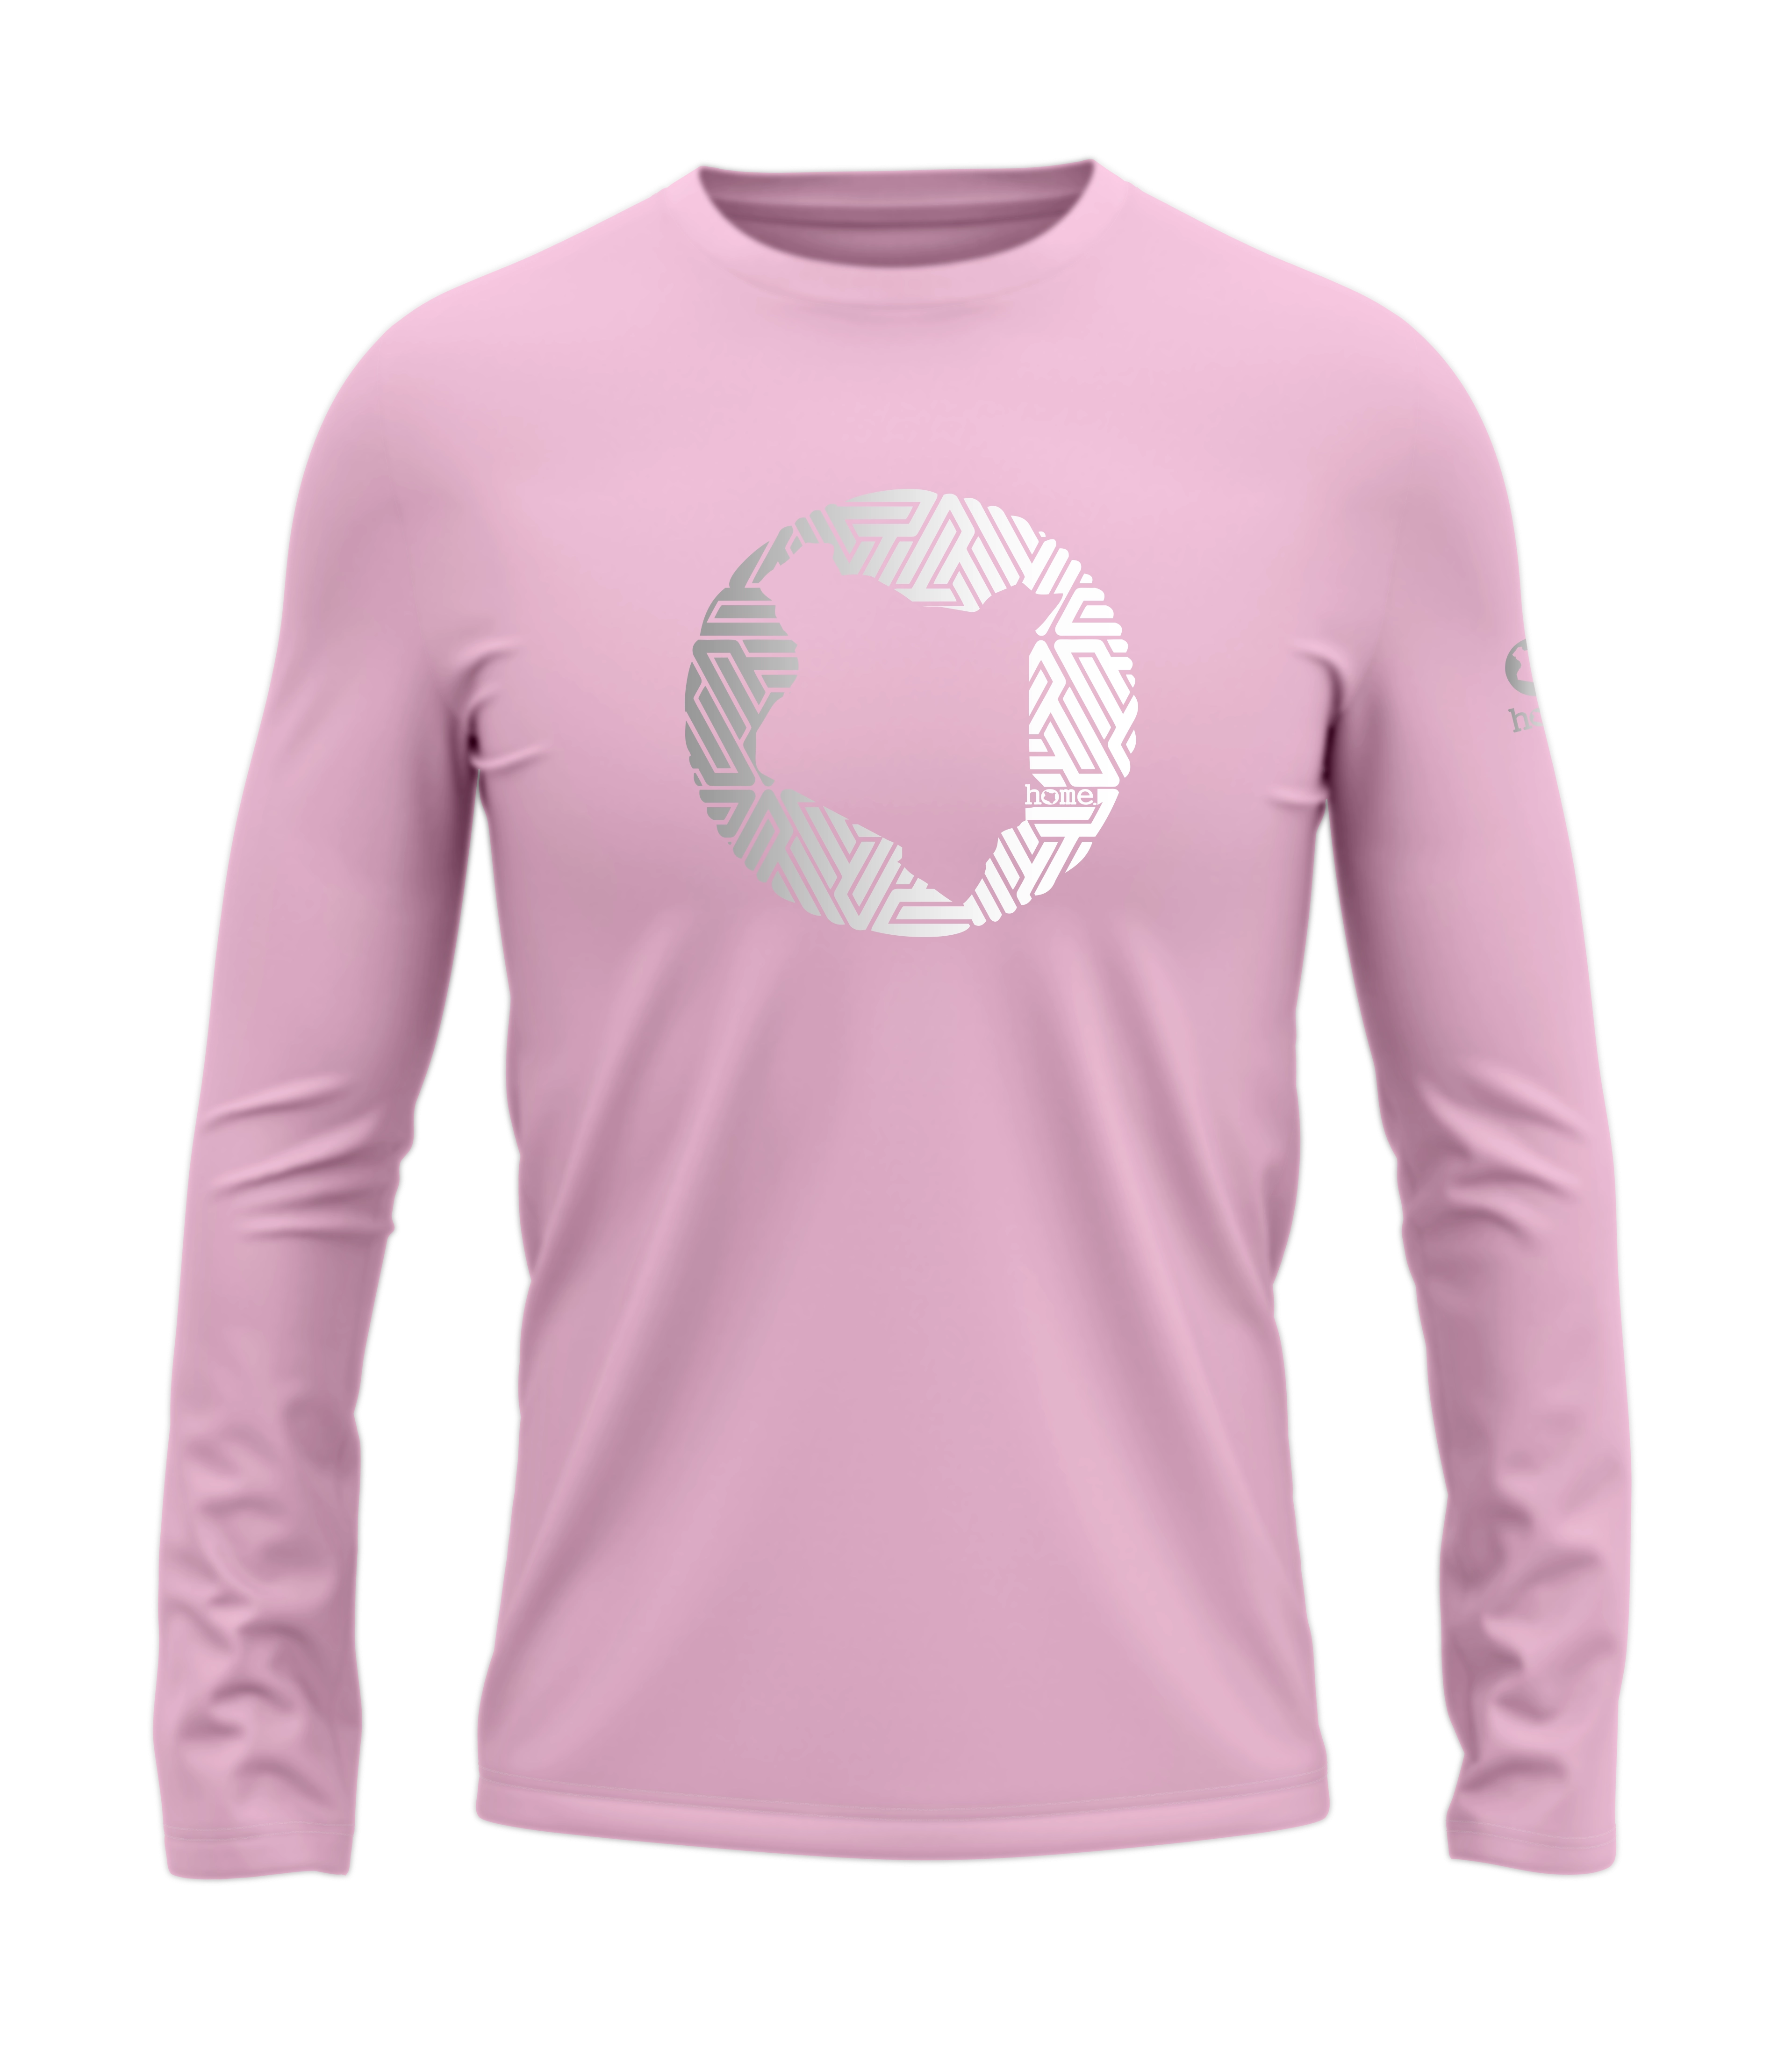 home_254 LONG-SLEEVED PINK T-SHIRT WITH A SILVER MAP PRINT – COTTON PLUS FABRIC